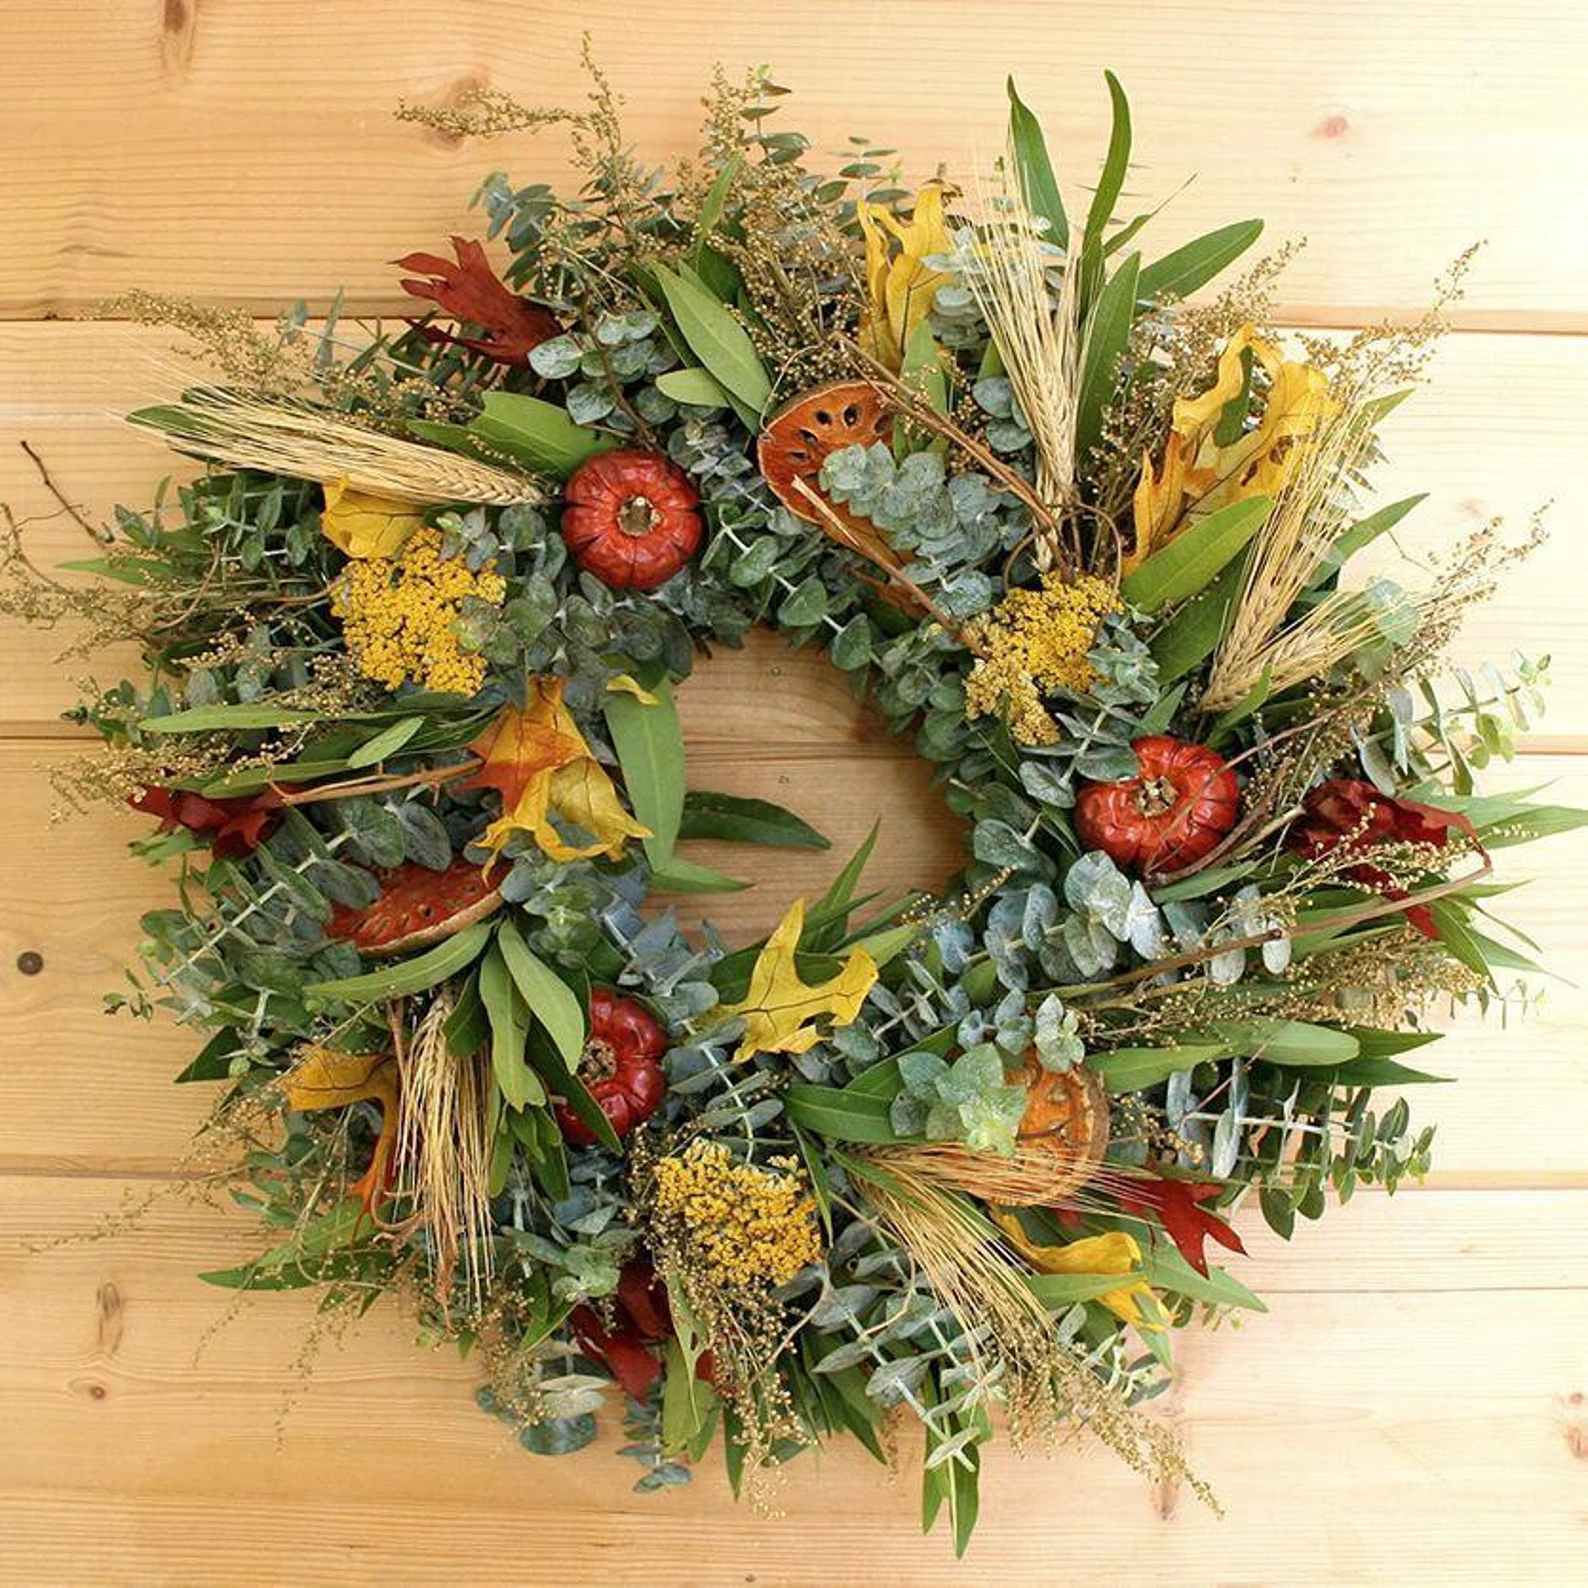 Fresh and Fragrant wreath - Thanksgiving home decorations ideas